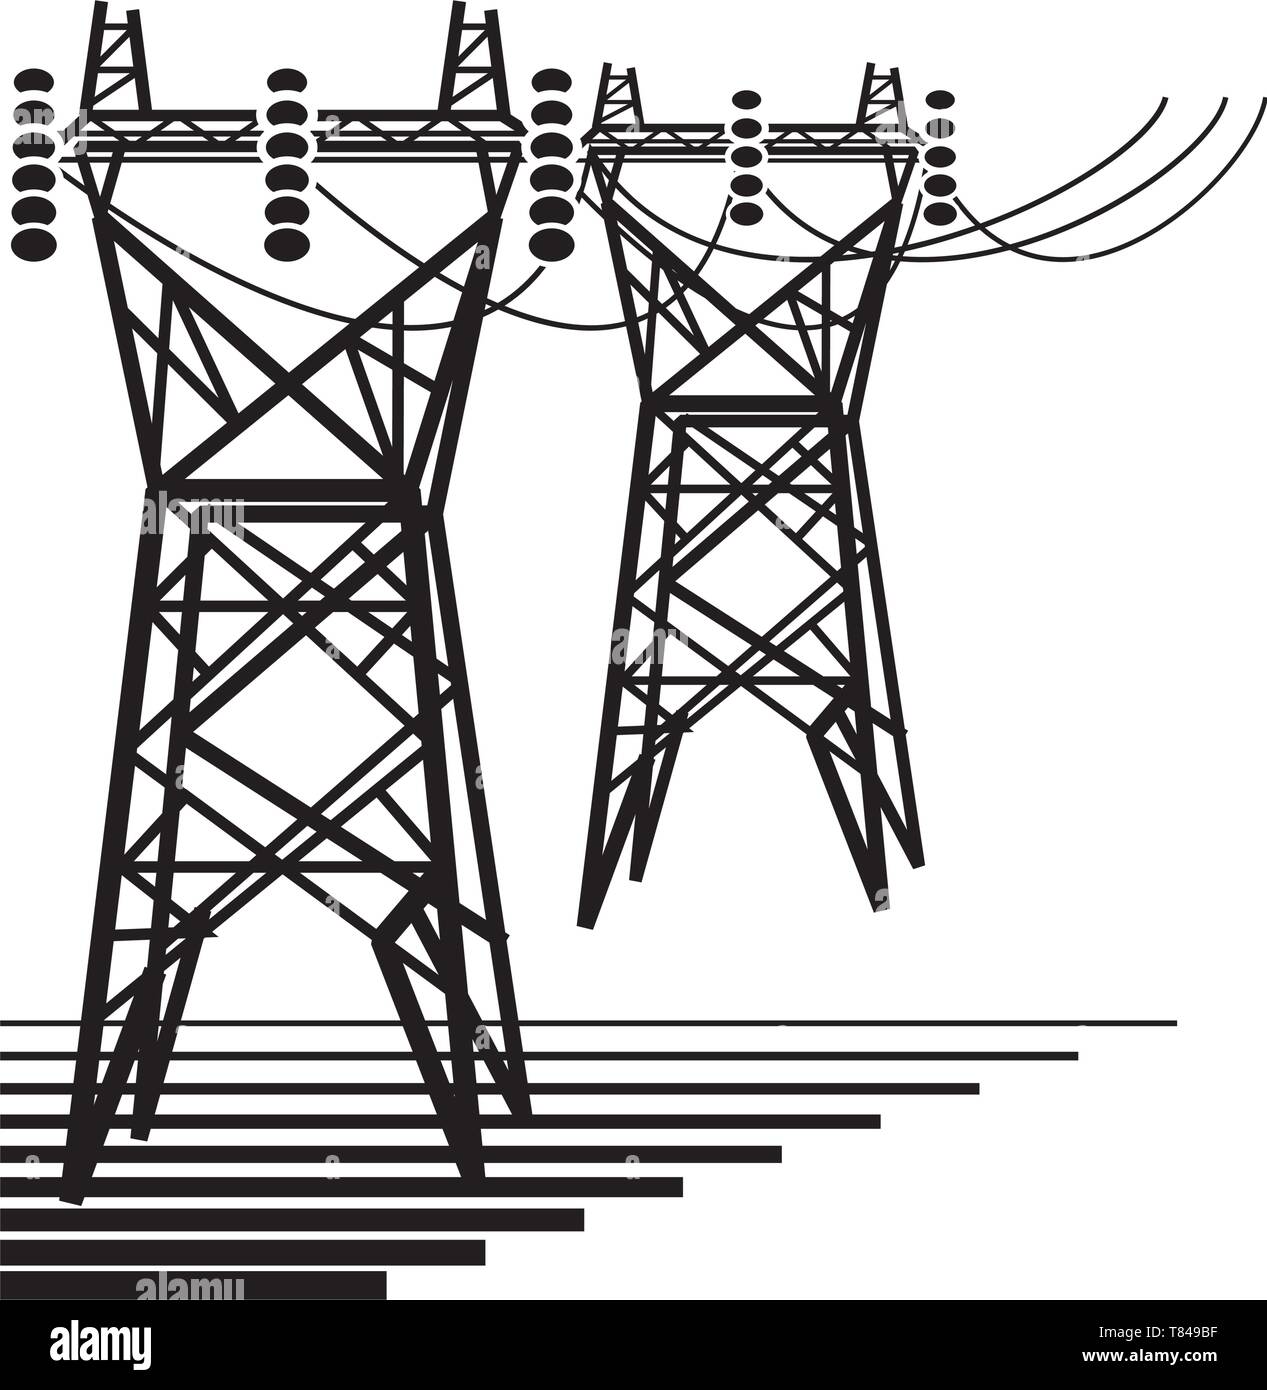 Electricity. The electric power transmission towers of high voltage line. Stock Vector